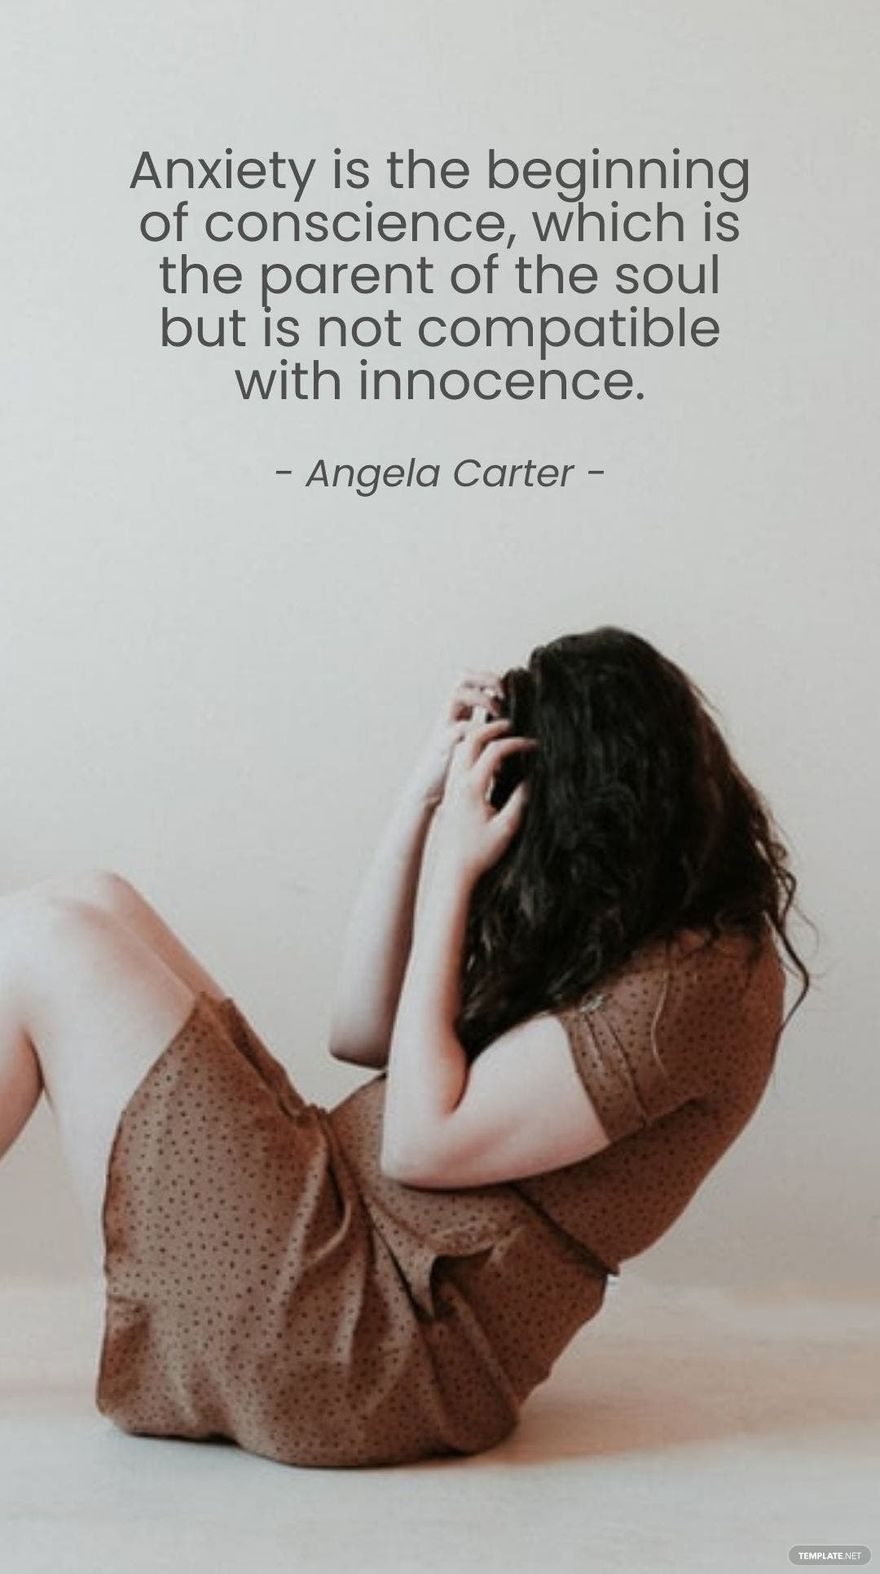 Free Angela Carter - Anxiety is the beginning of conscience, which is the parent of the soul but is not compatible with innocence. in JPG